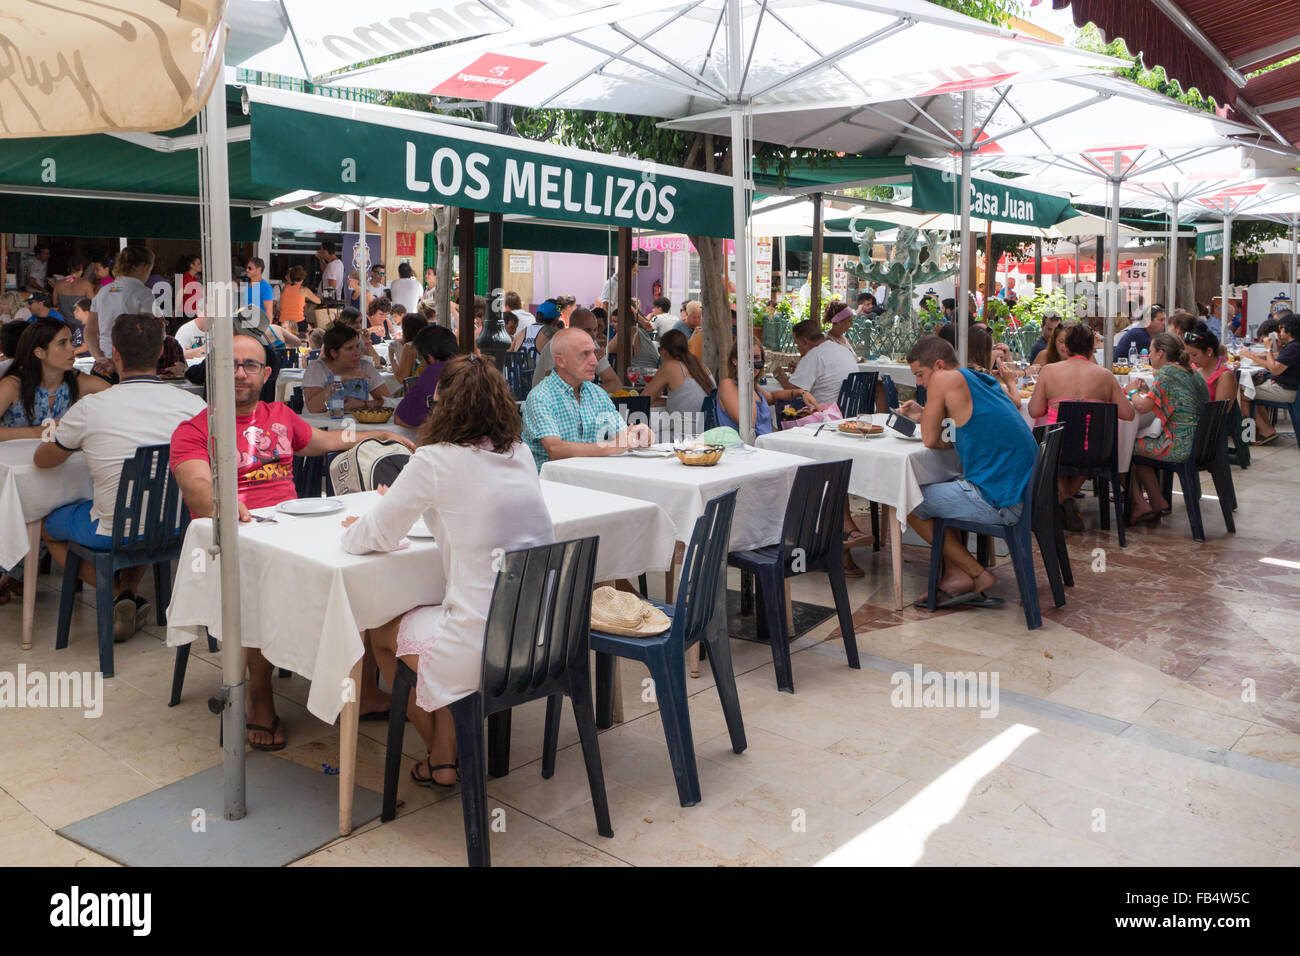 Carihuela, Spain-August 23rd 2015: People eating lunch in a busy restaurant. Carihuela is a beach resort in Torremolinos. Stock Photo